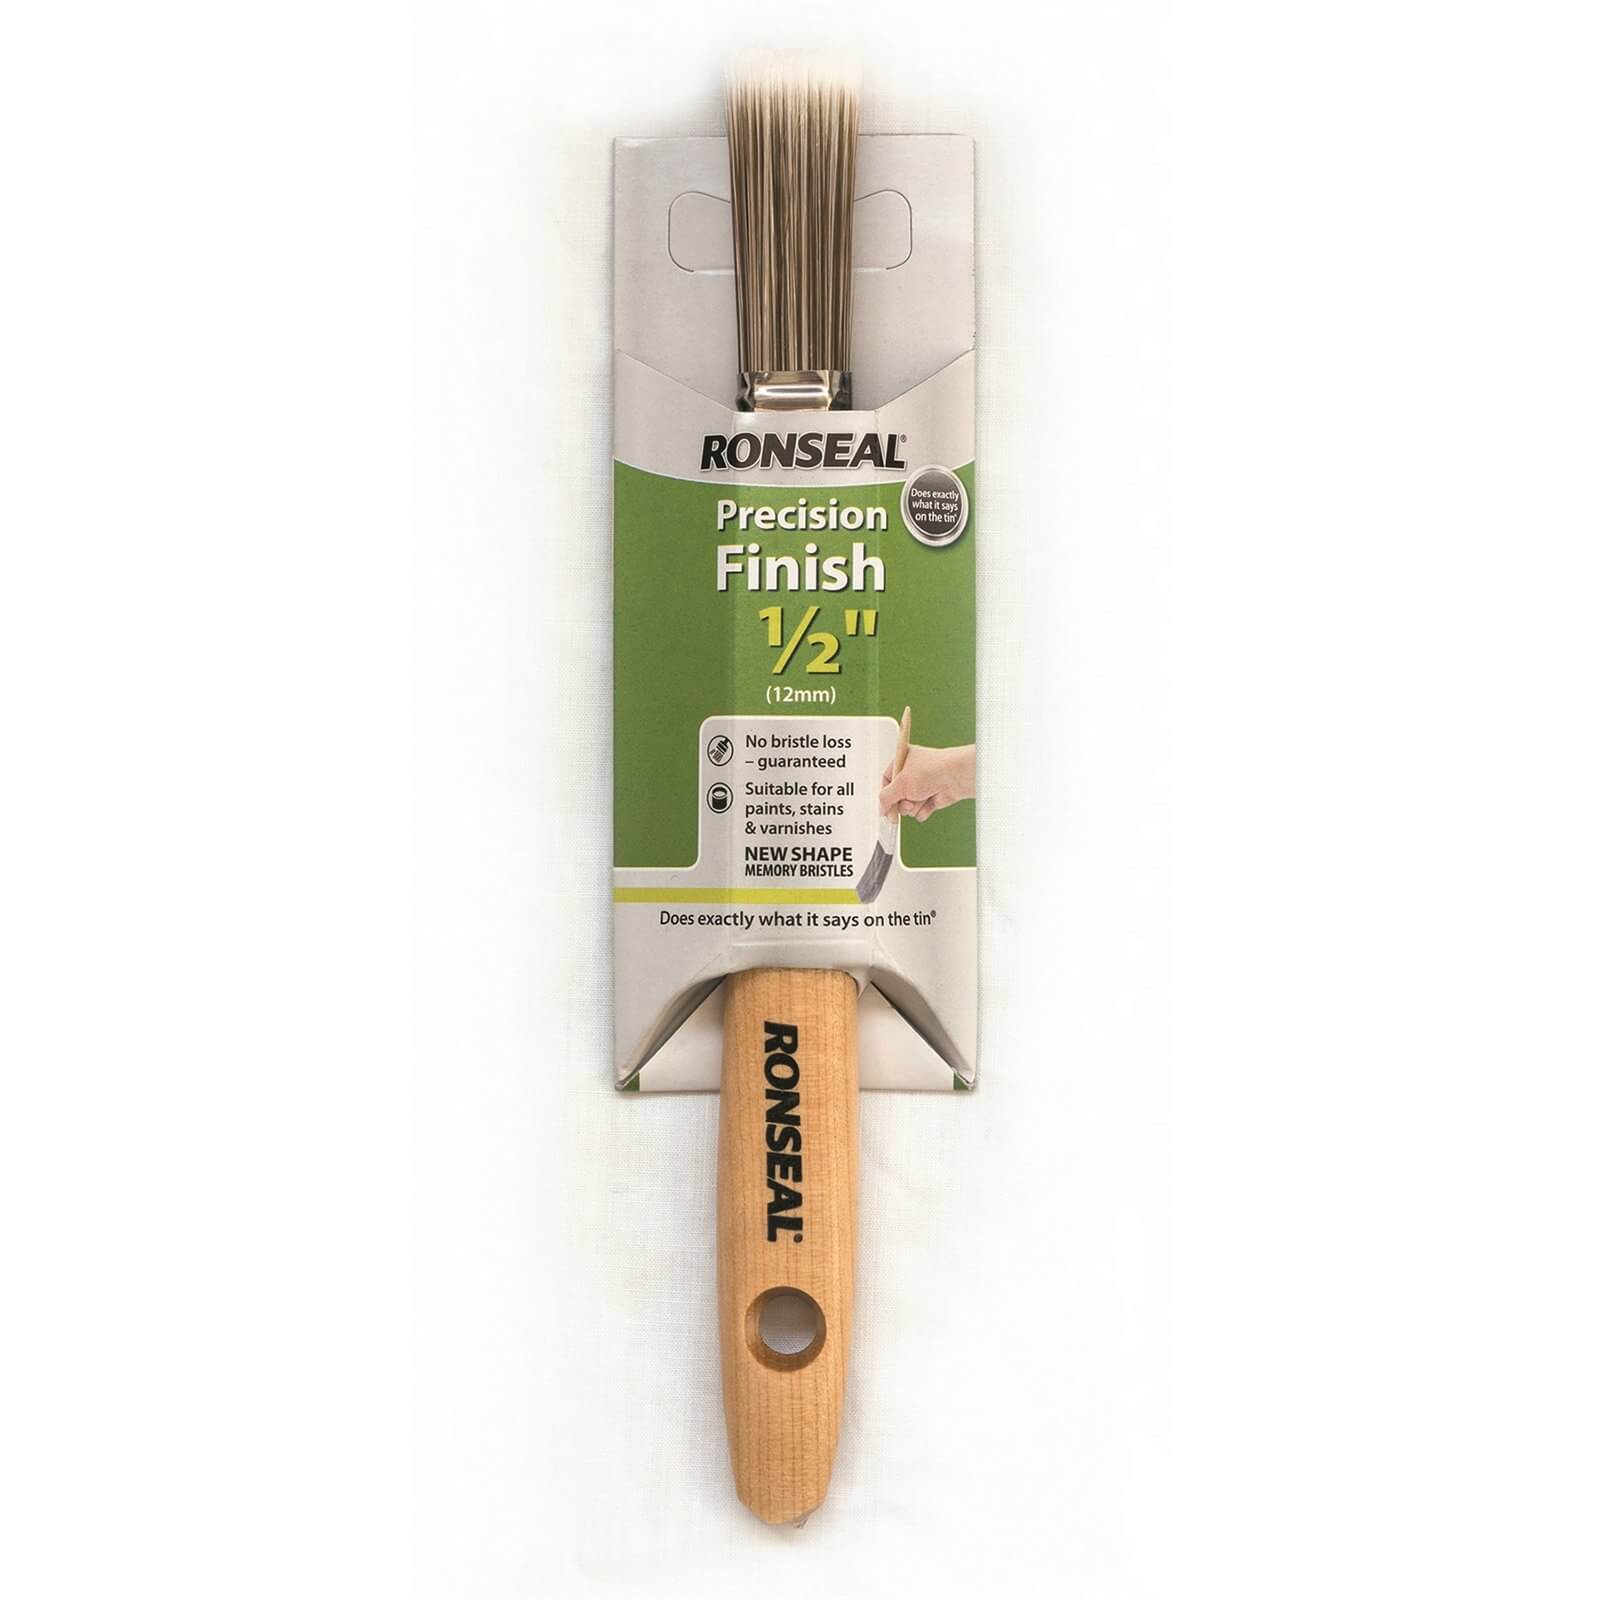 Ronseal Precision Finish Brush - 0.5in